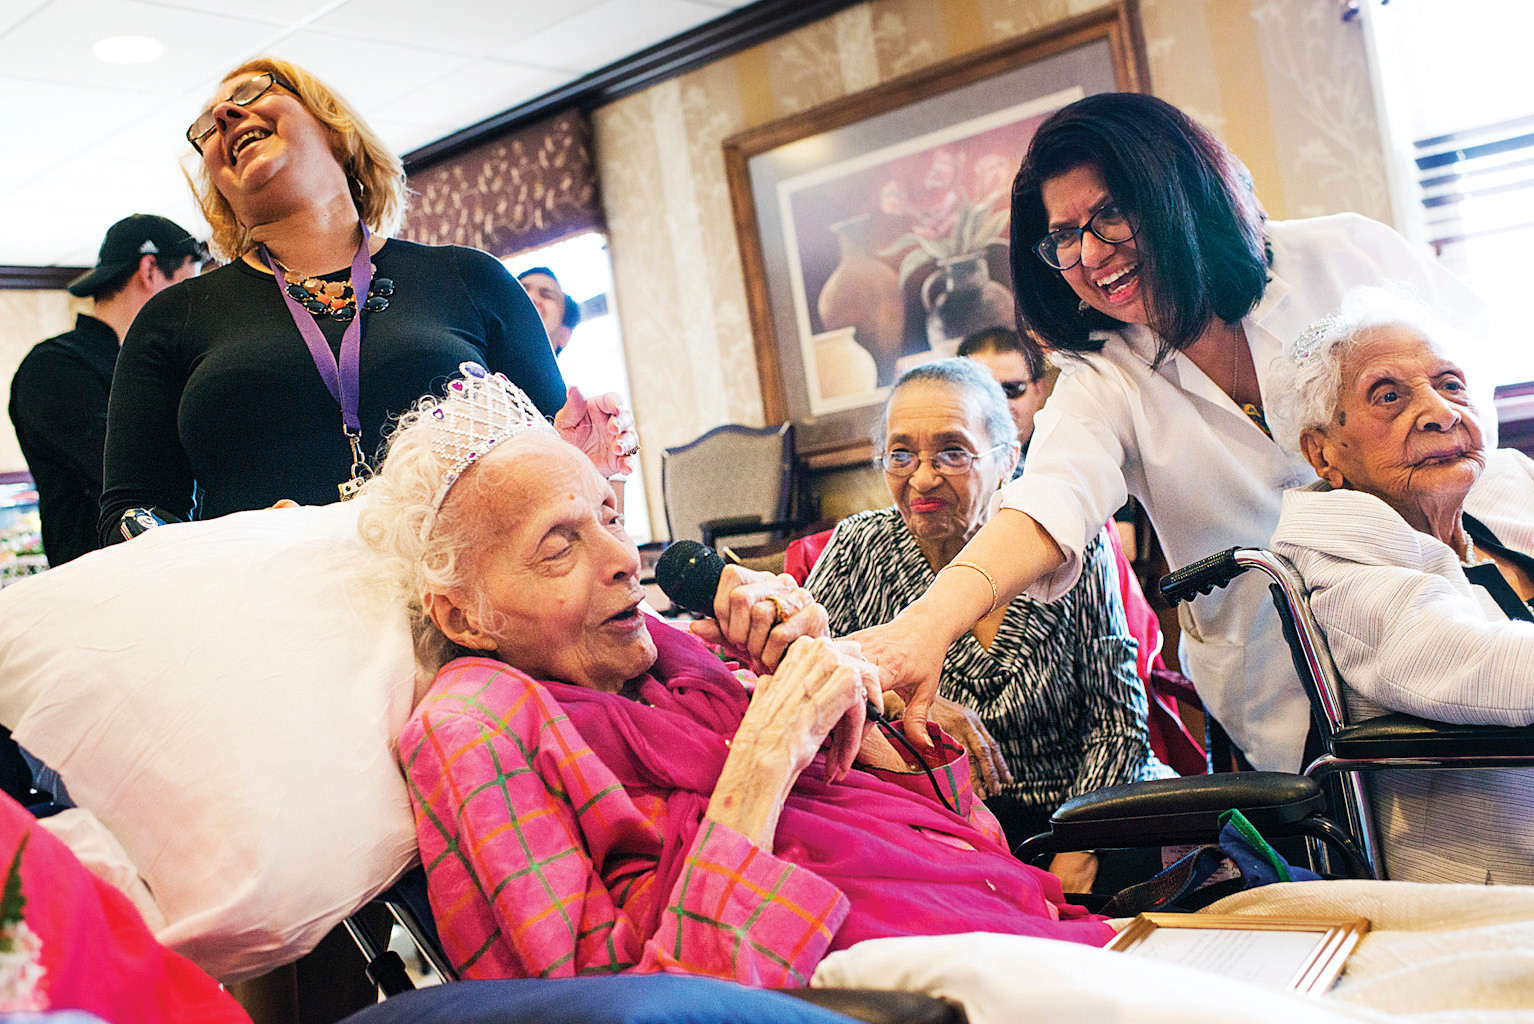 Bernice King, 108, thanks faculty and residents for attending her birthday party in the Manhattanville Health Care center in Kingsbridge, on April 15.